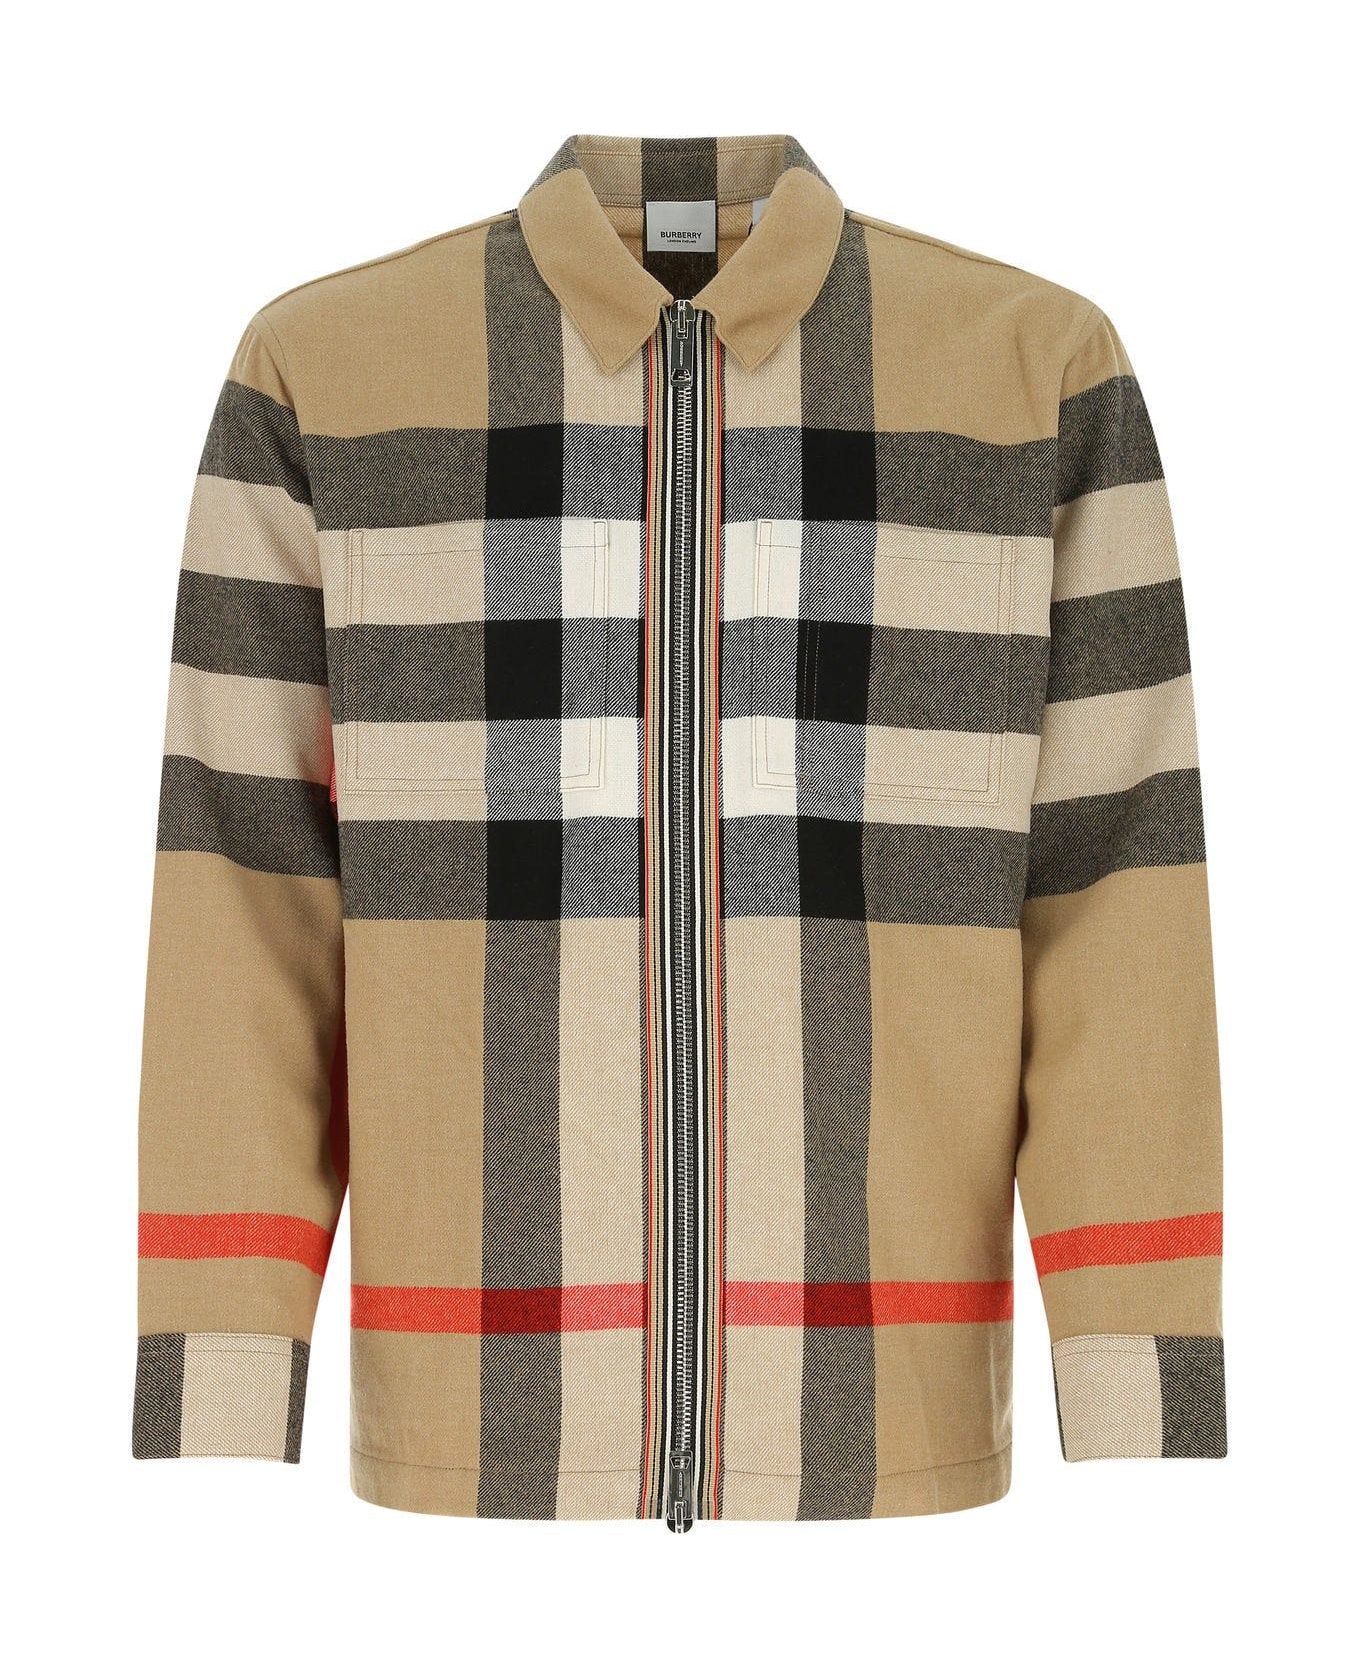 Burberry Embroidered Flannel Shirt - Archive beige ip chk シャツ